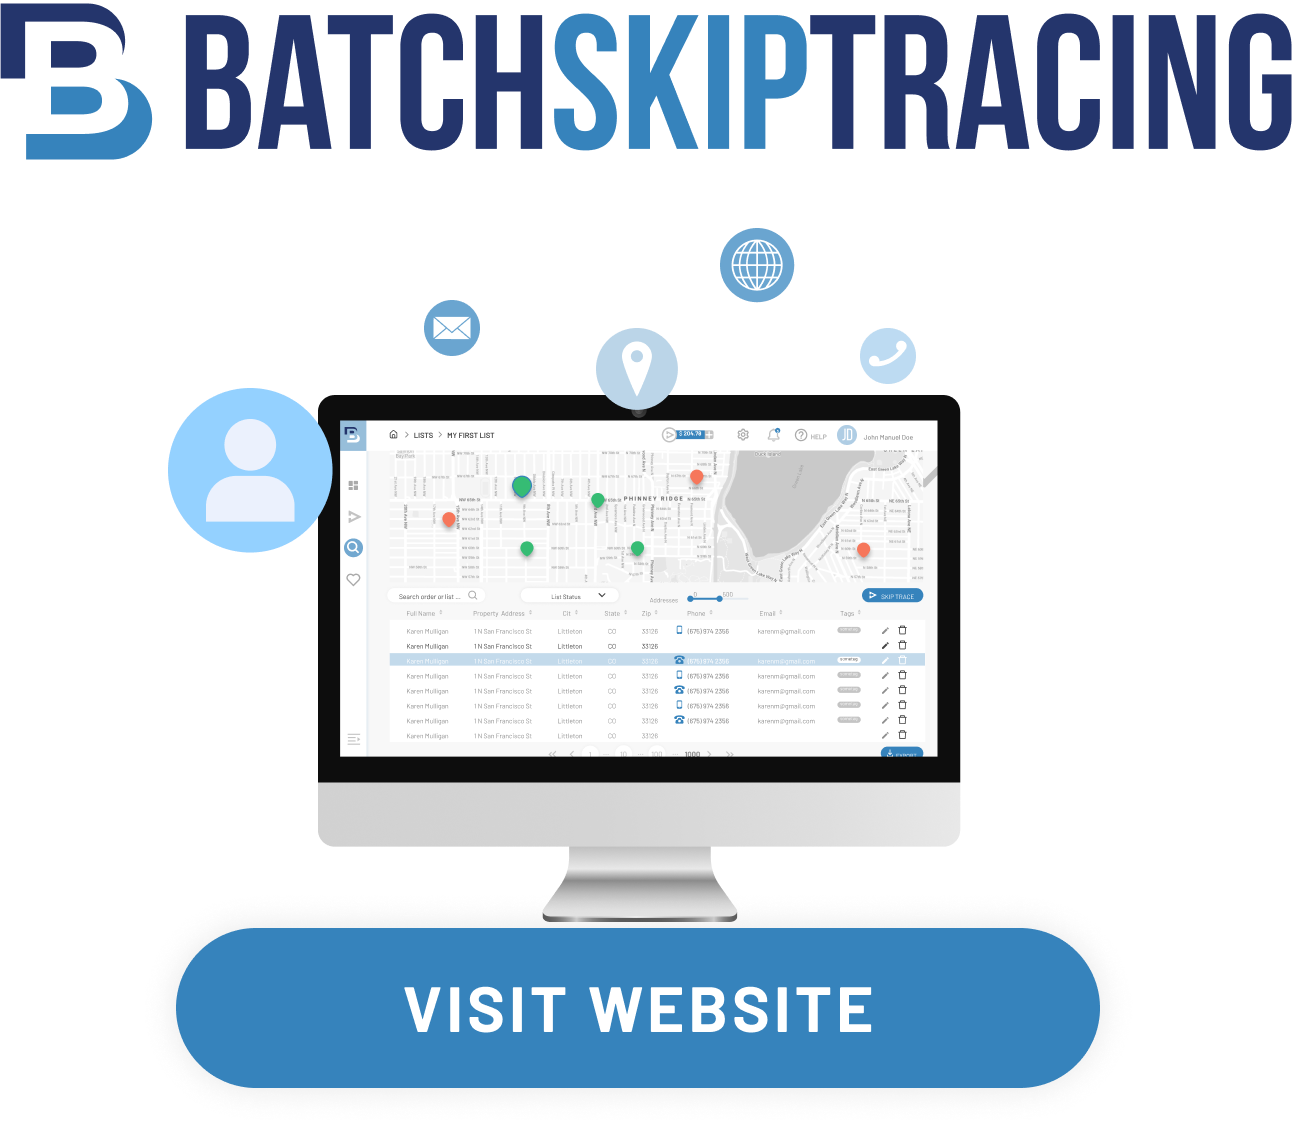 Batch Skip Tracing on iMac and iPhone